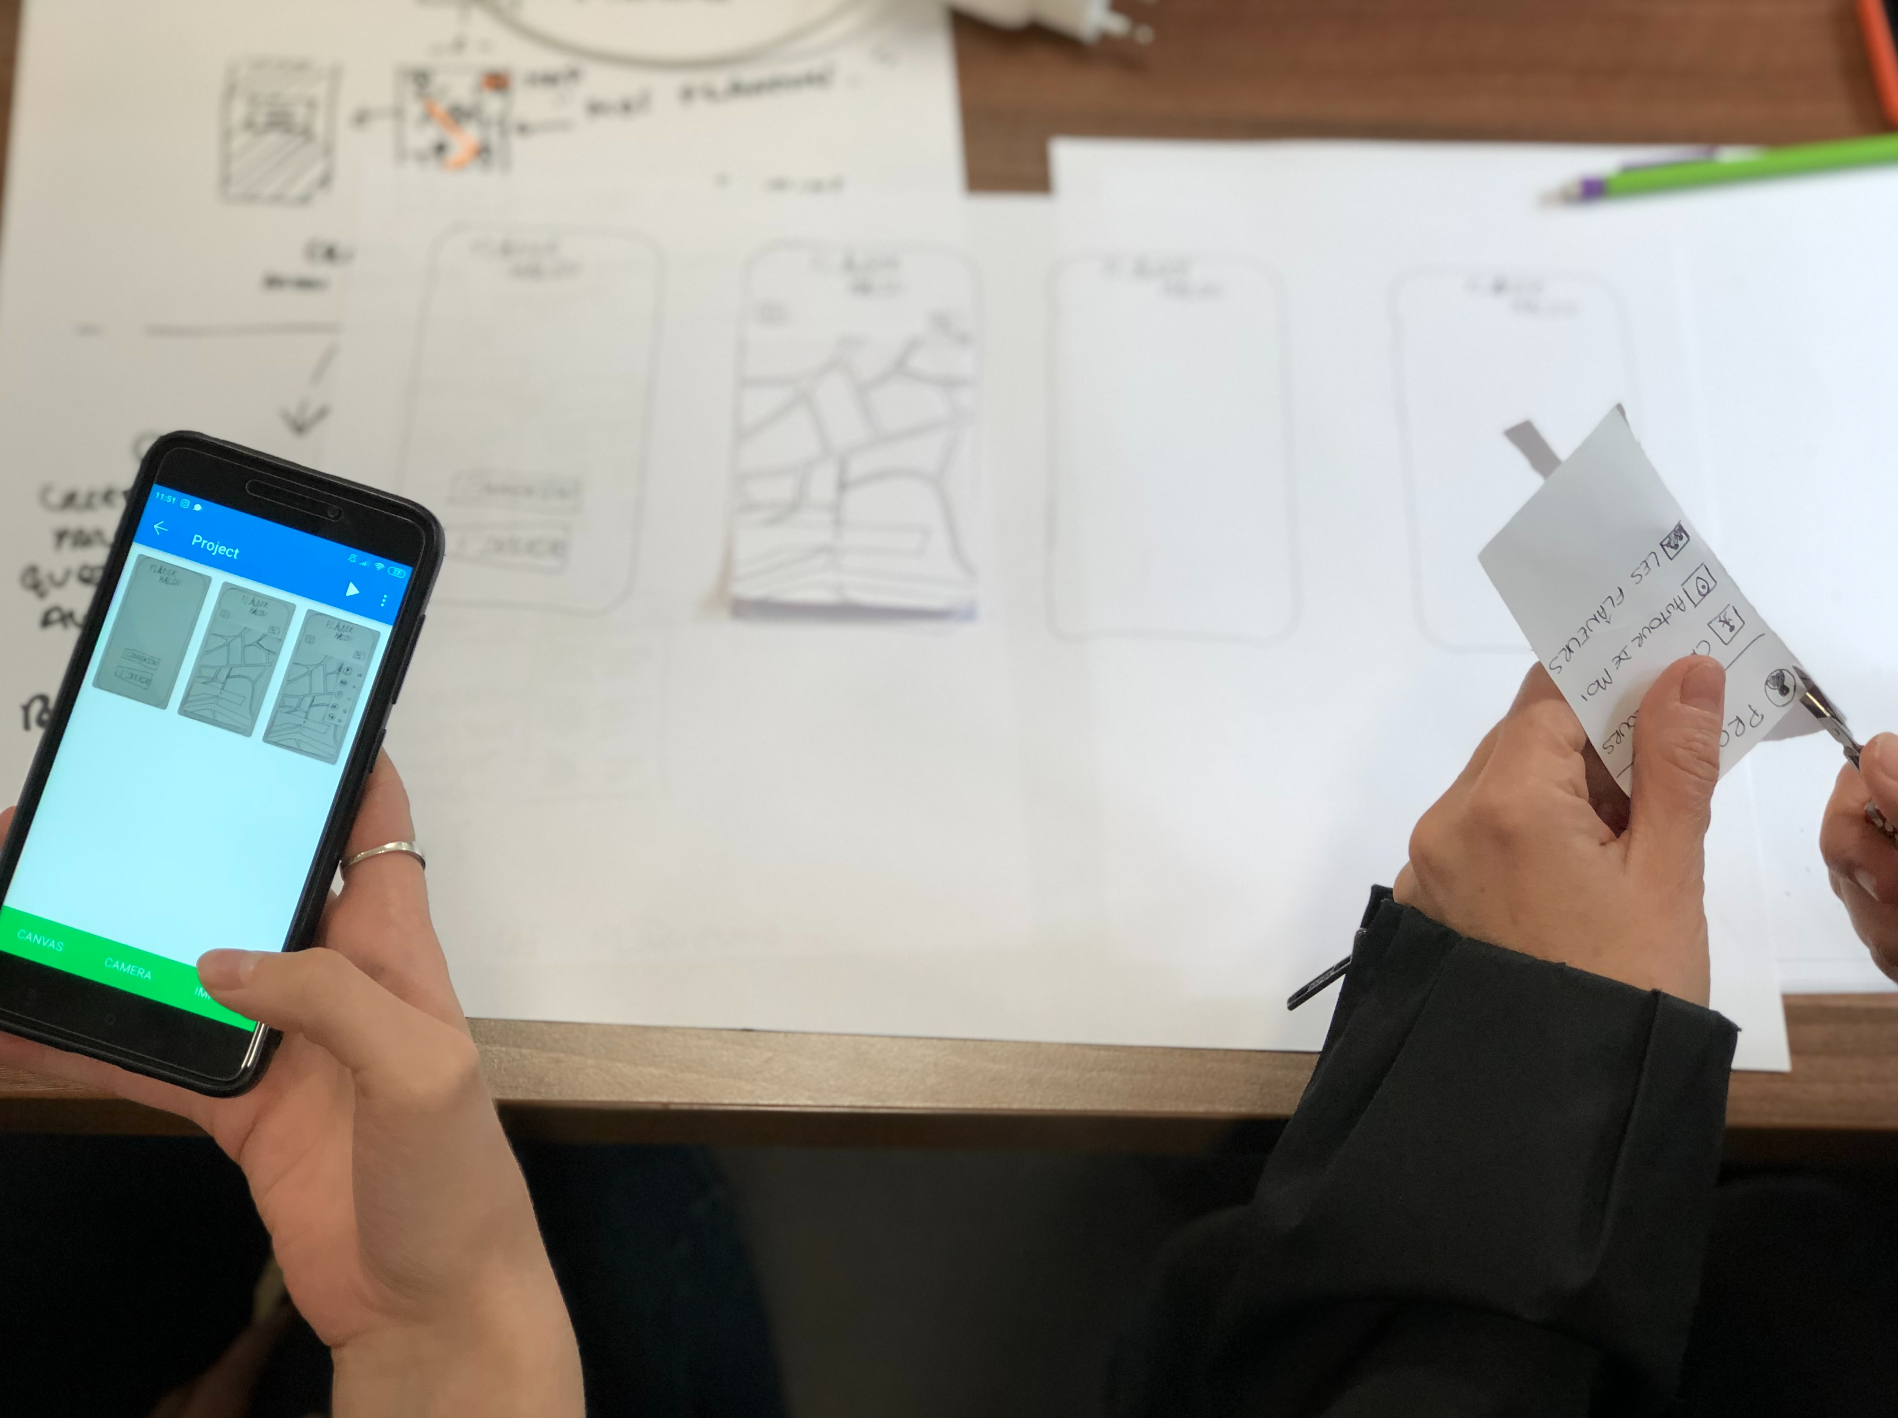 one person cutting out prototype drawings and another person holding a phone with photos of the prototype